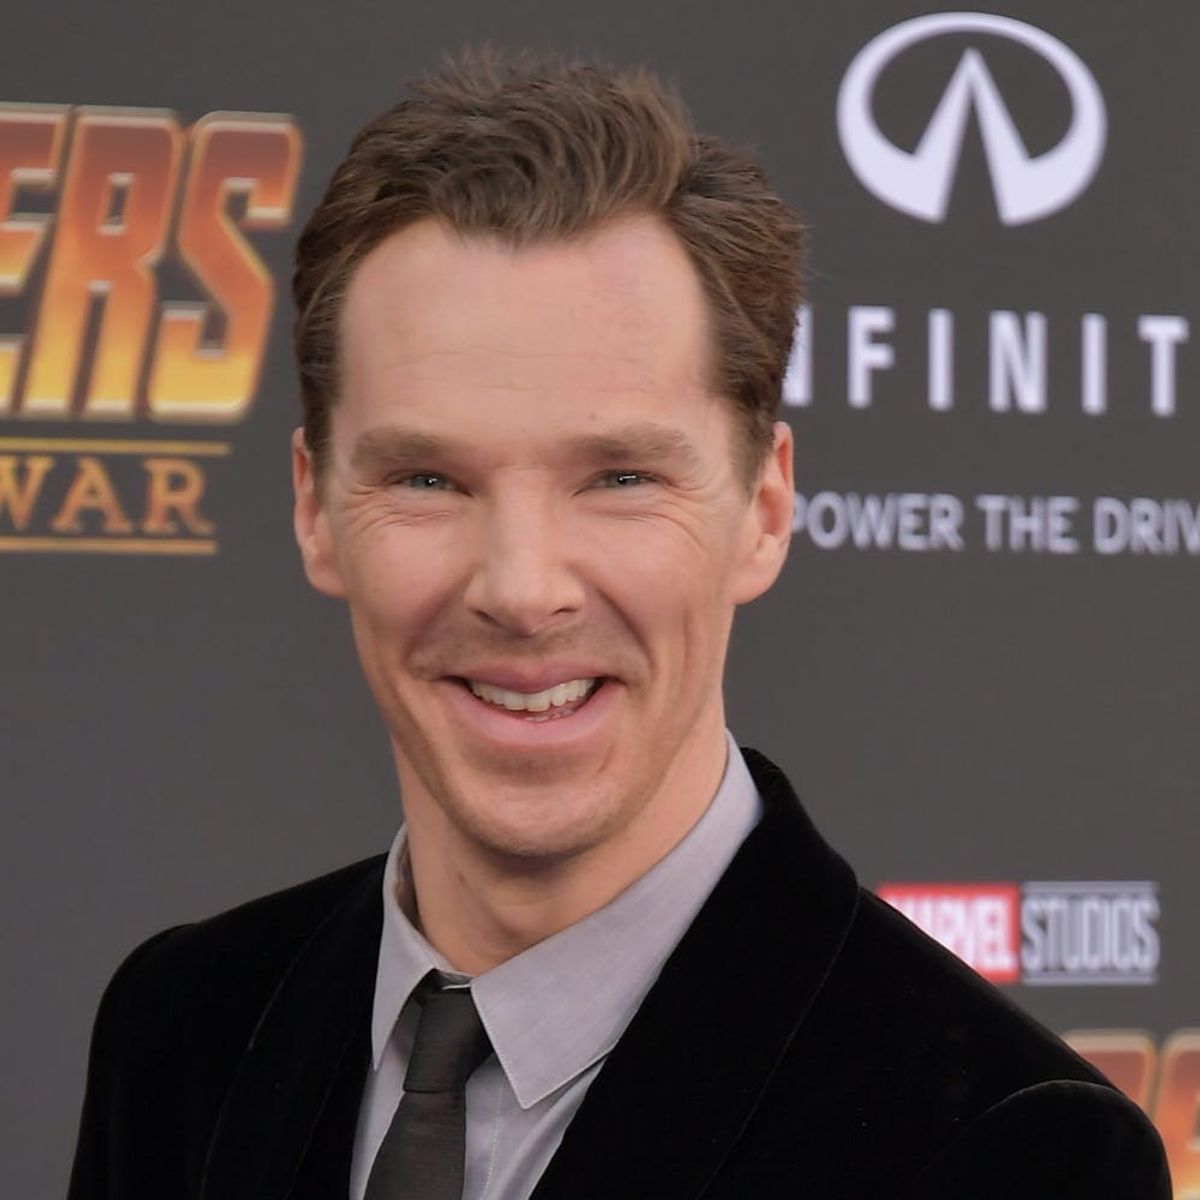 Benedict Cumberbatch Reportedly Saved a Man from Being Mugged - Brit + Co